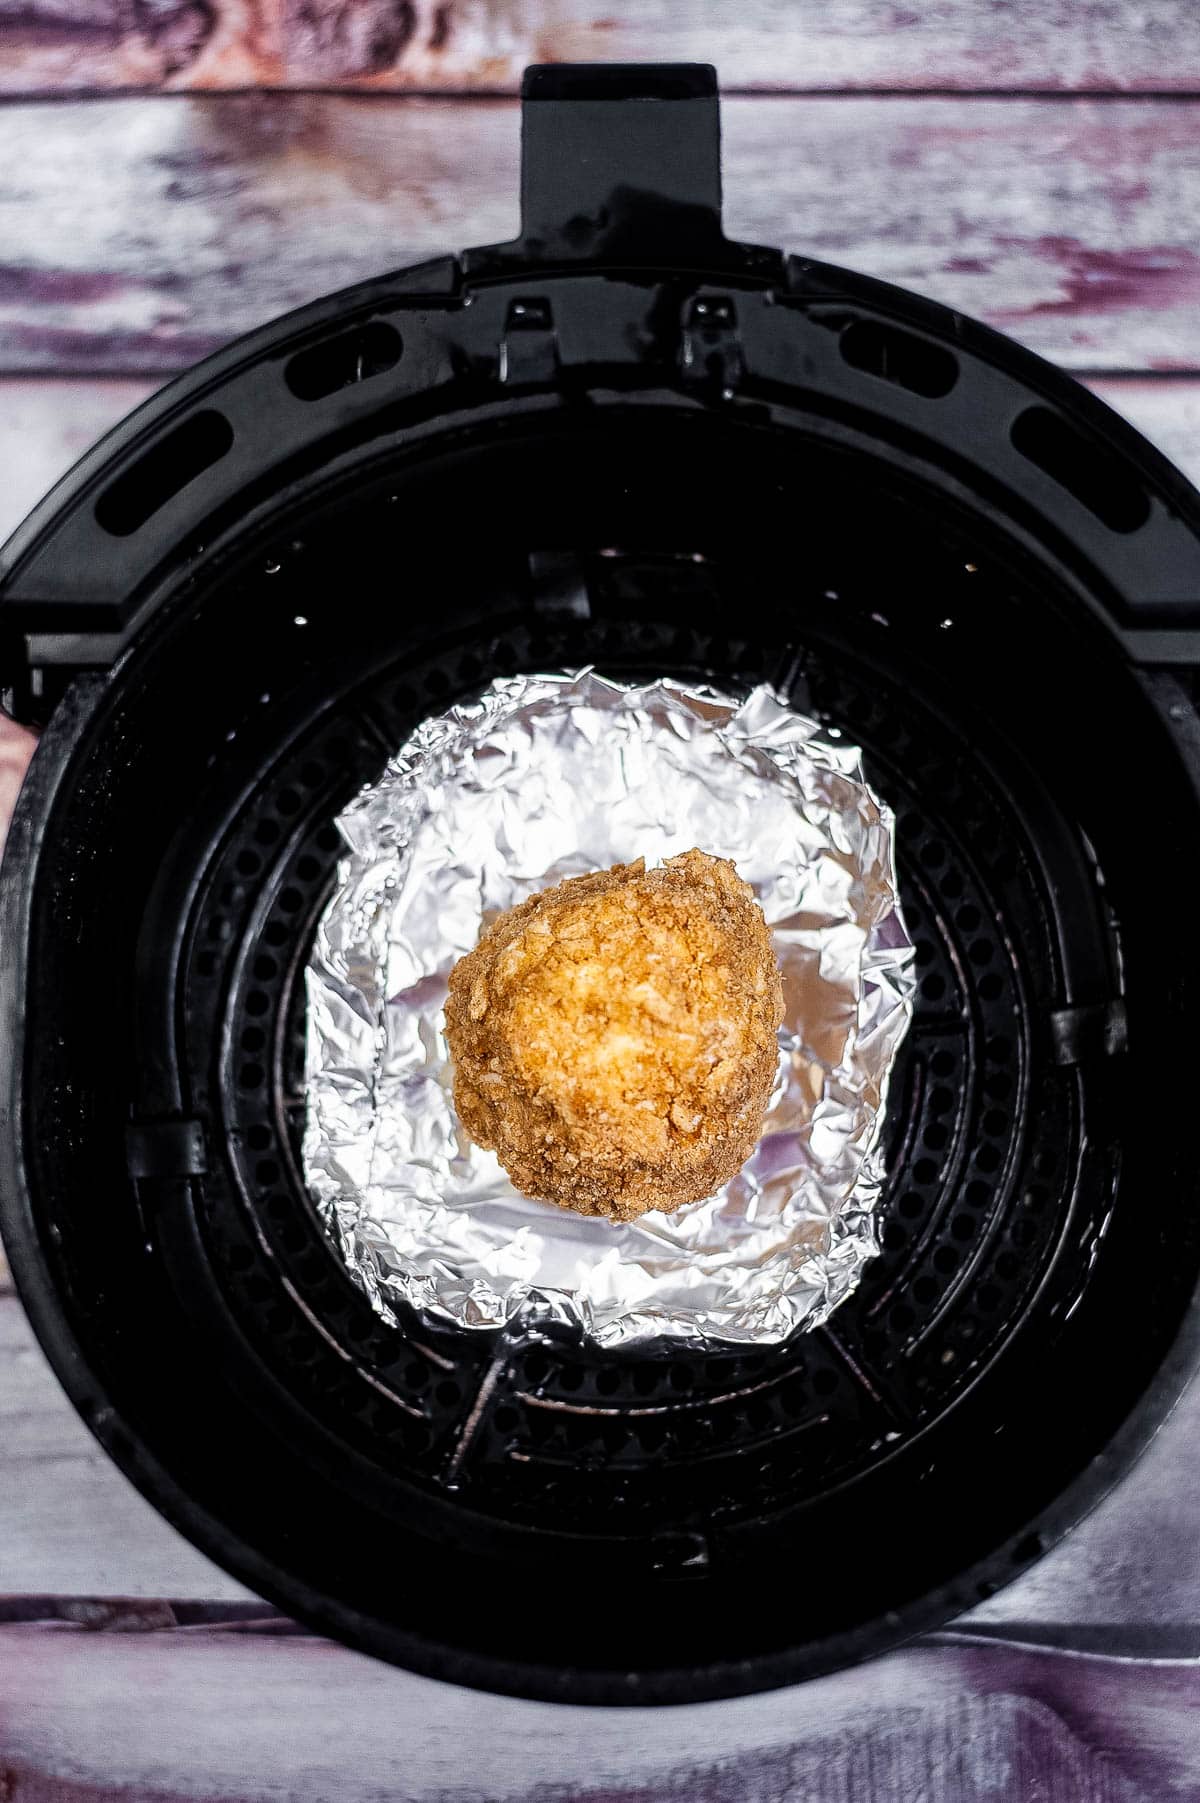 coated ice cream ball on foil in the air fryer basket.